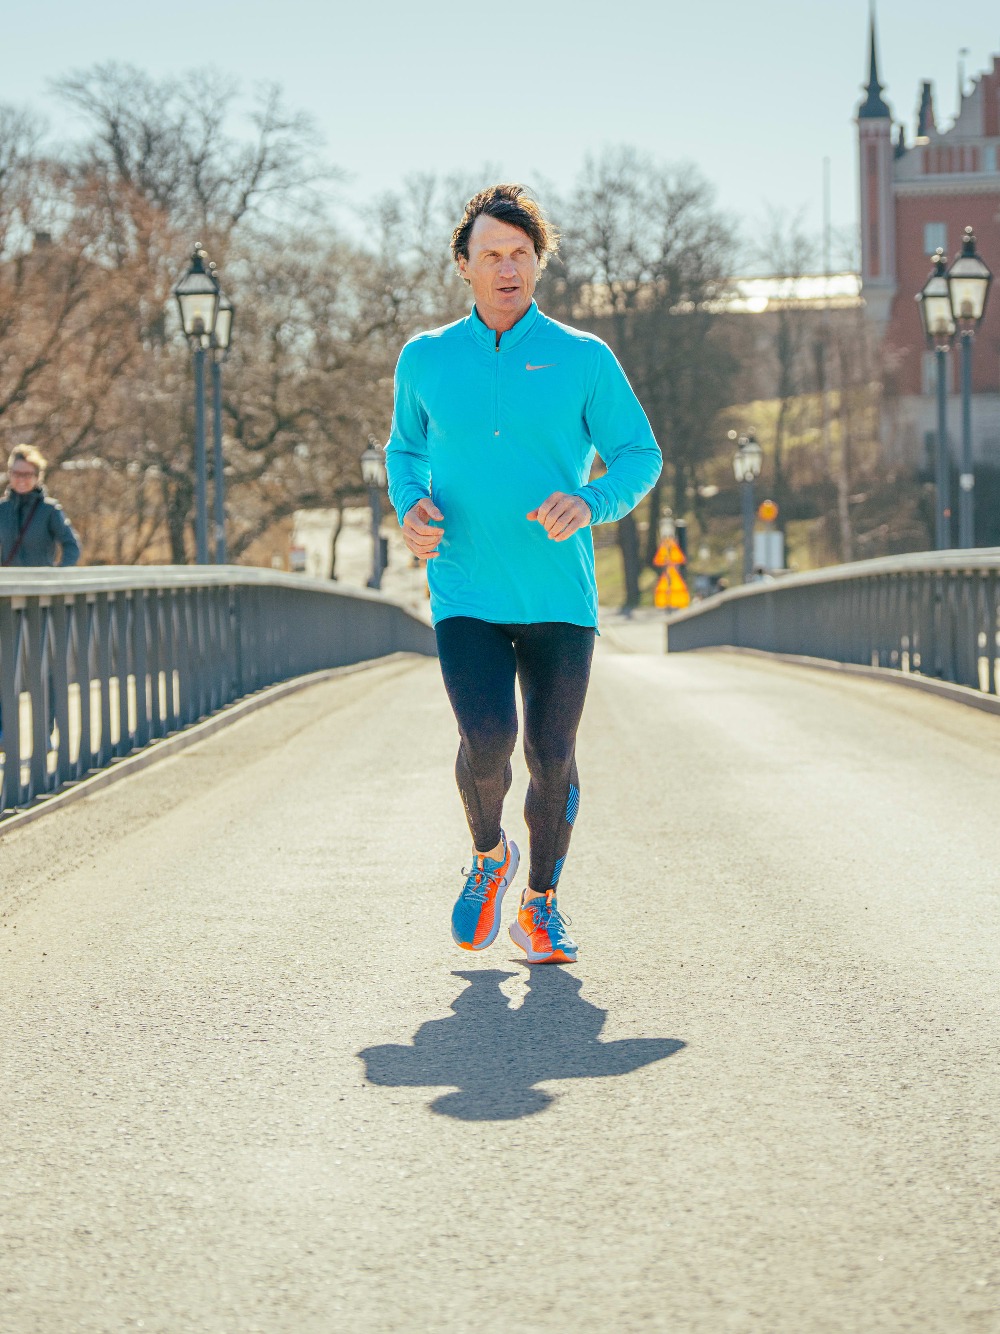 Petter Stordalen sightrunning through Stockholm on a sunny day.